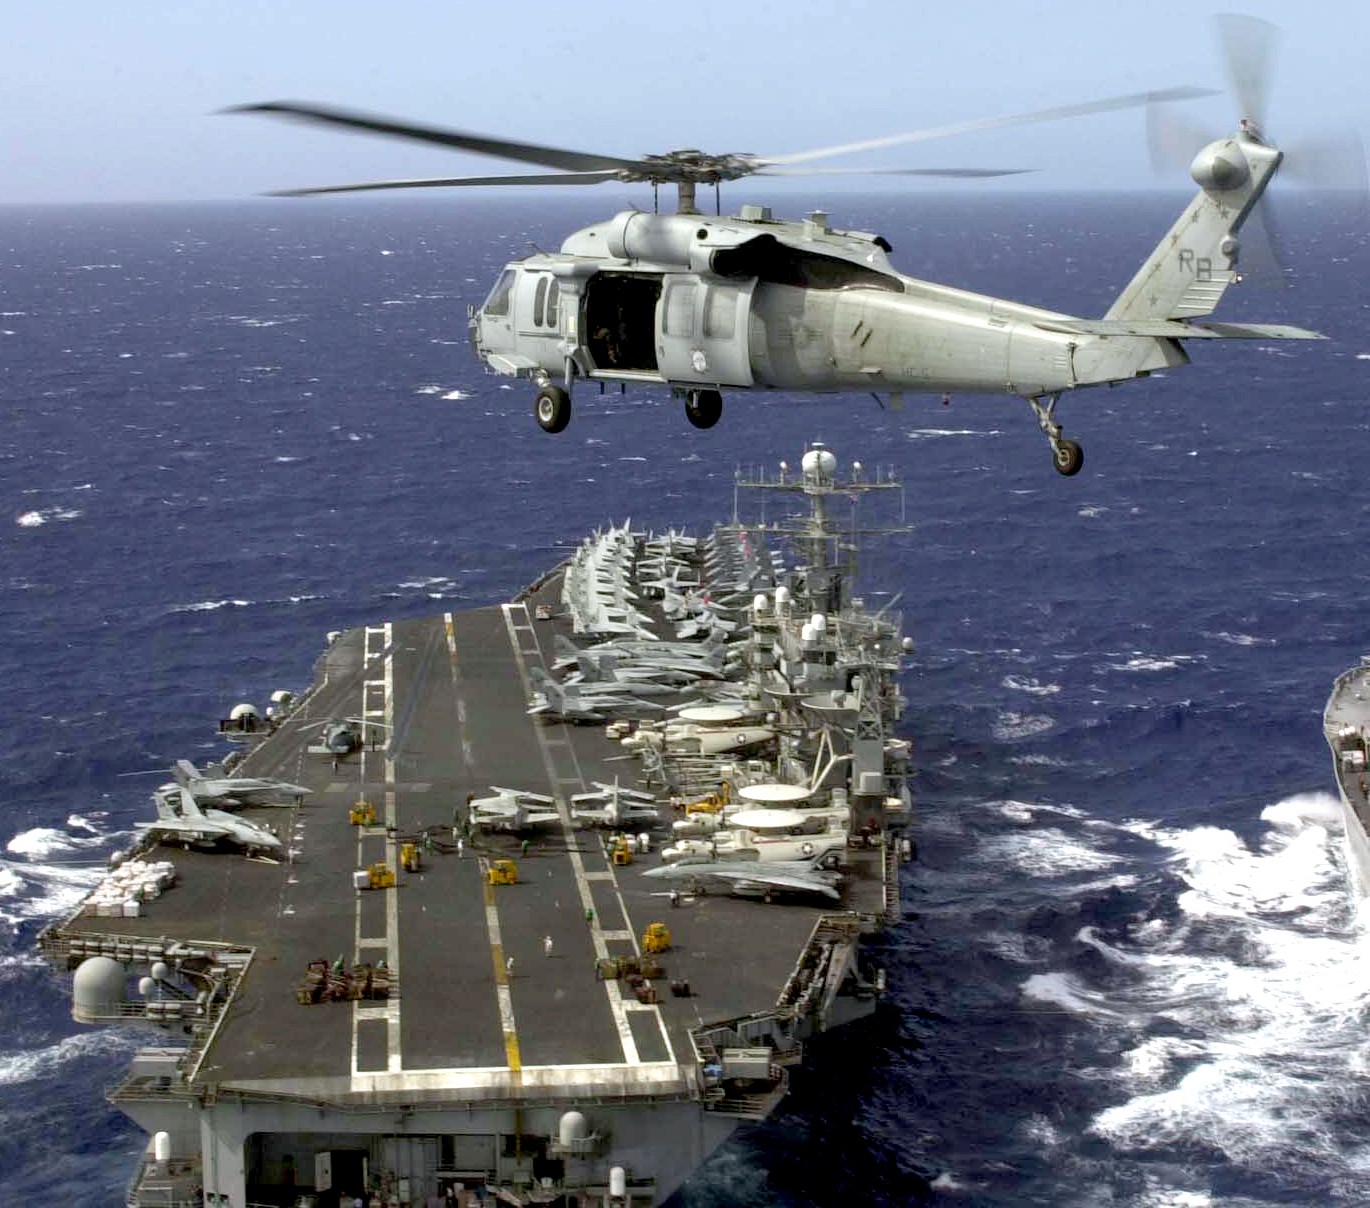 hc-5 providers helicopter combat support squadron navy mh-60s seahawk 30